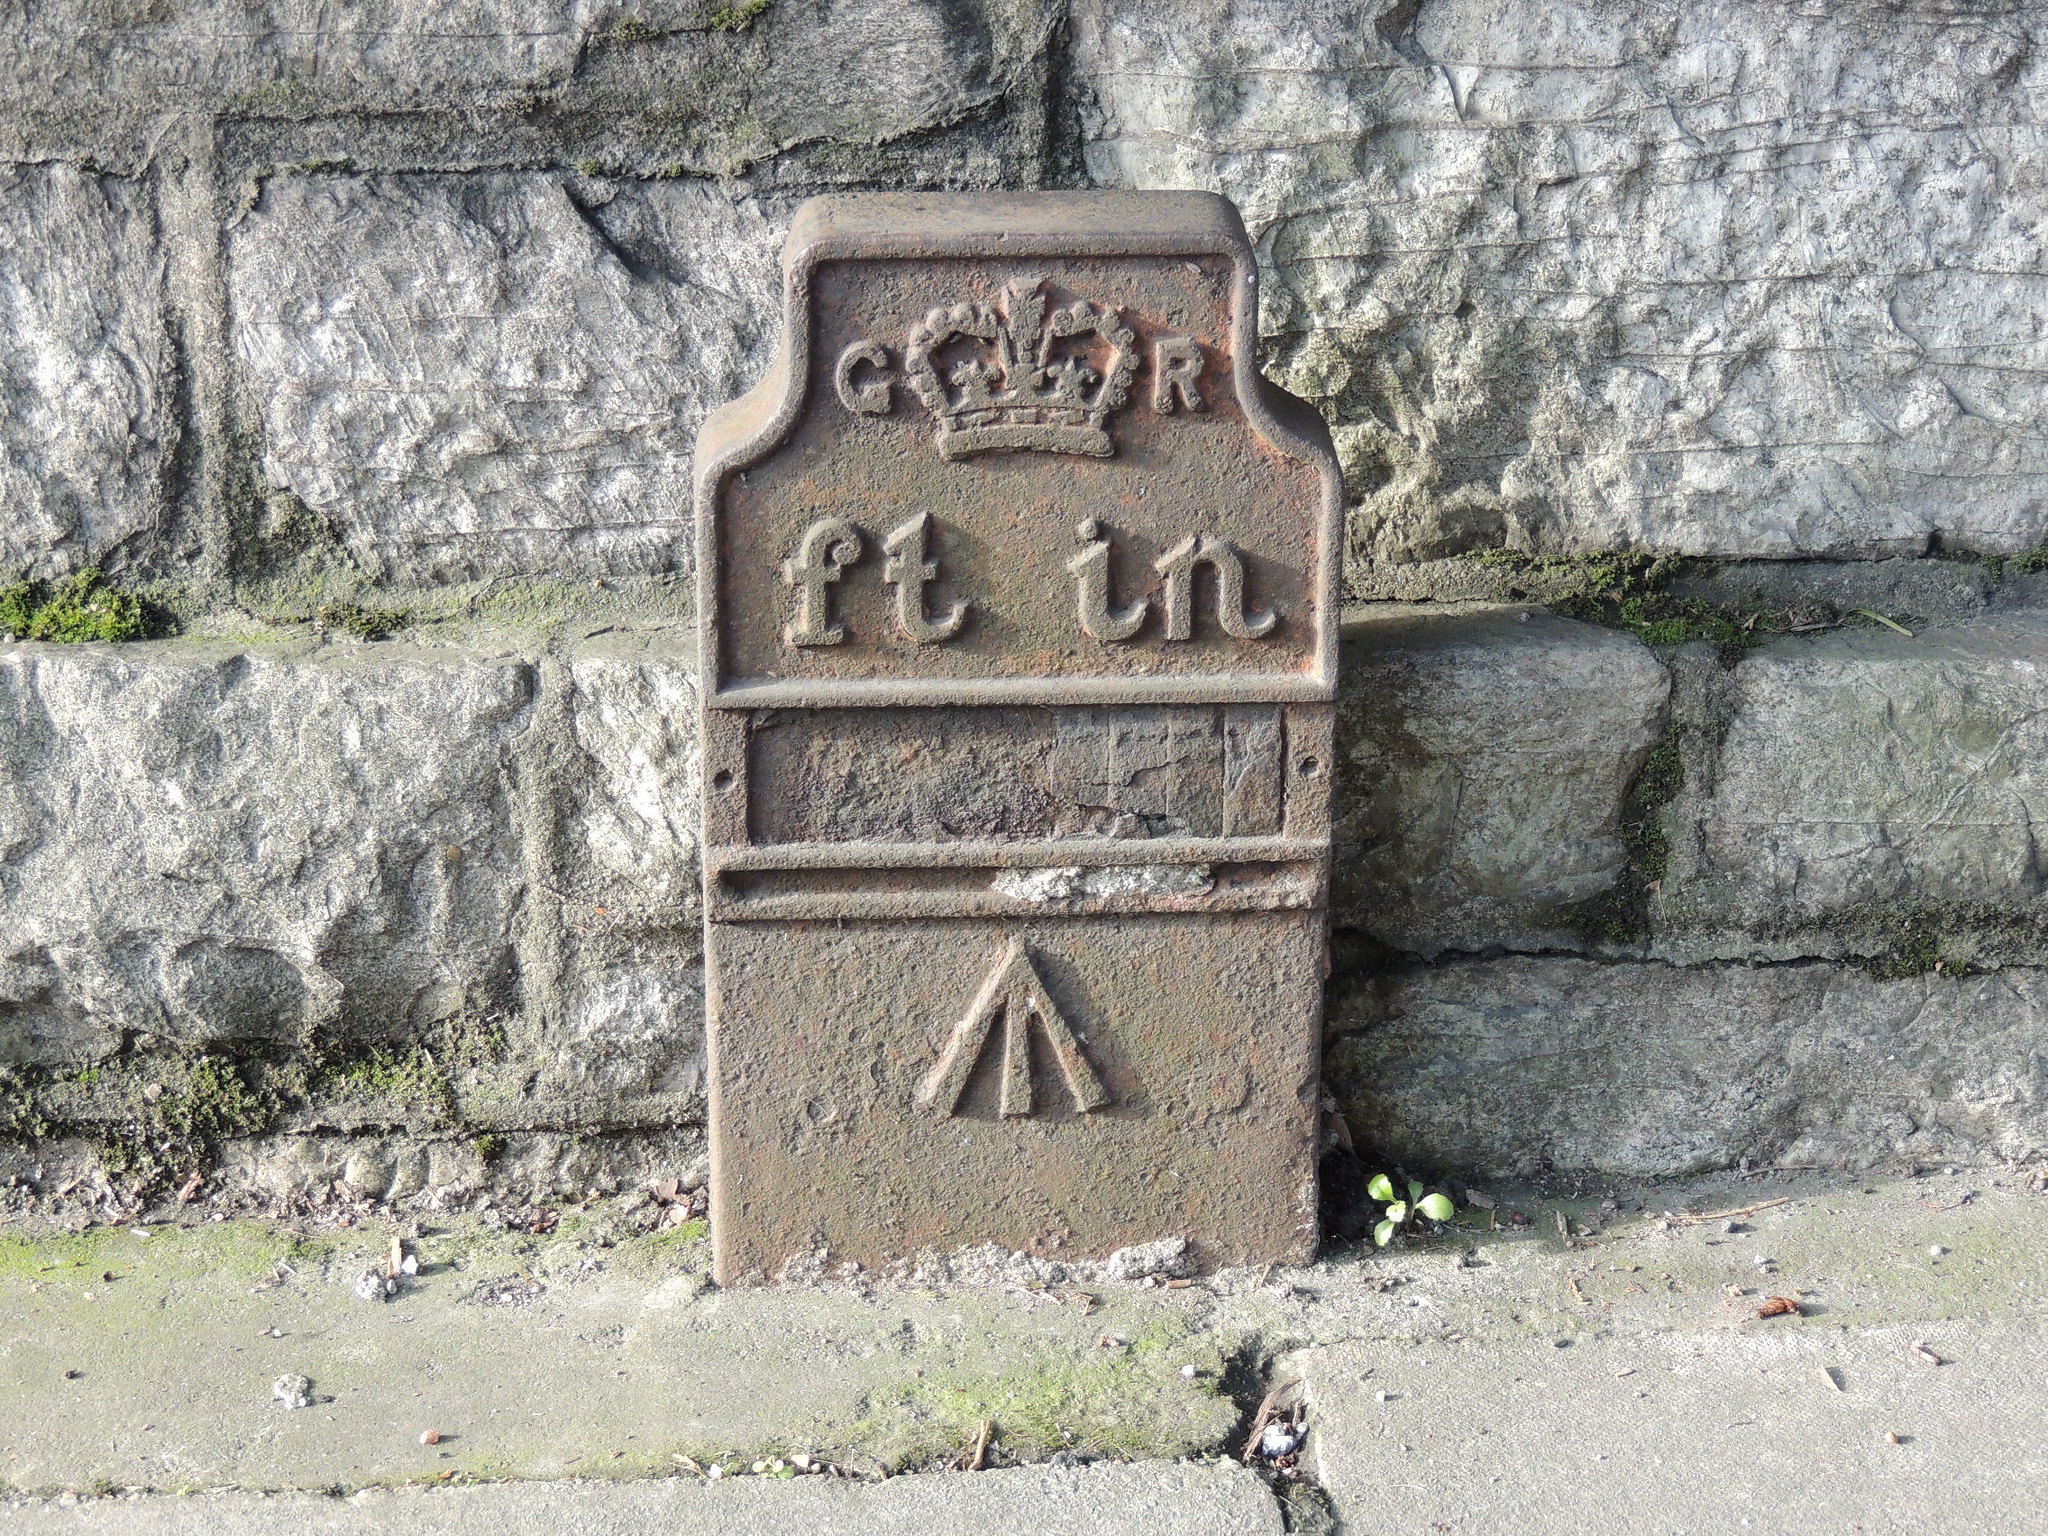 Telegraph cable marker post at 74 Mannamead Road, Plymouth by Torfaen Corvine 